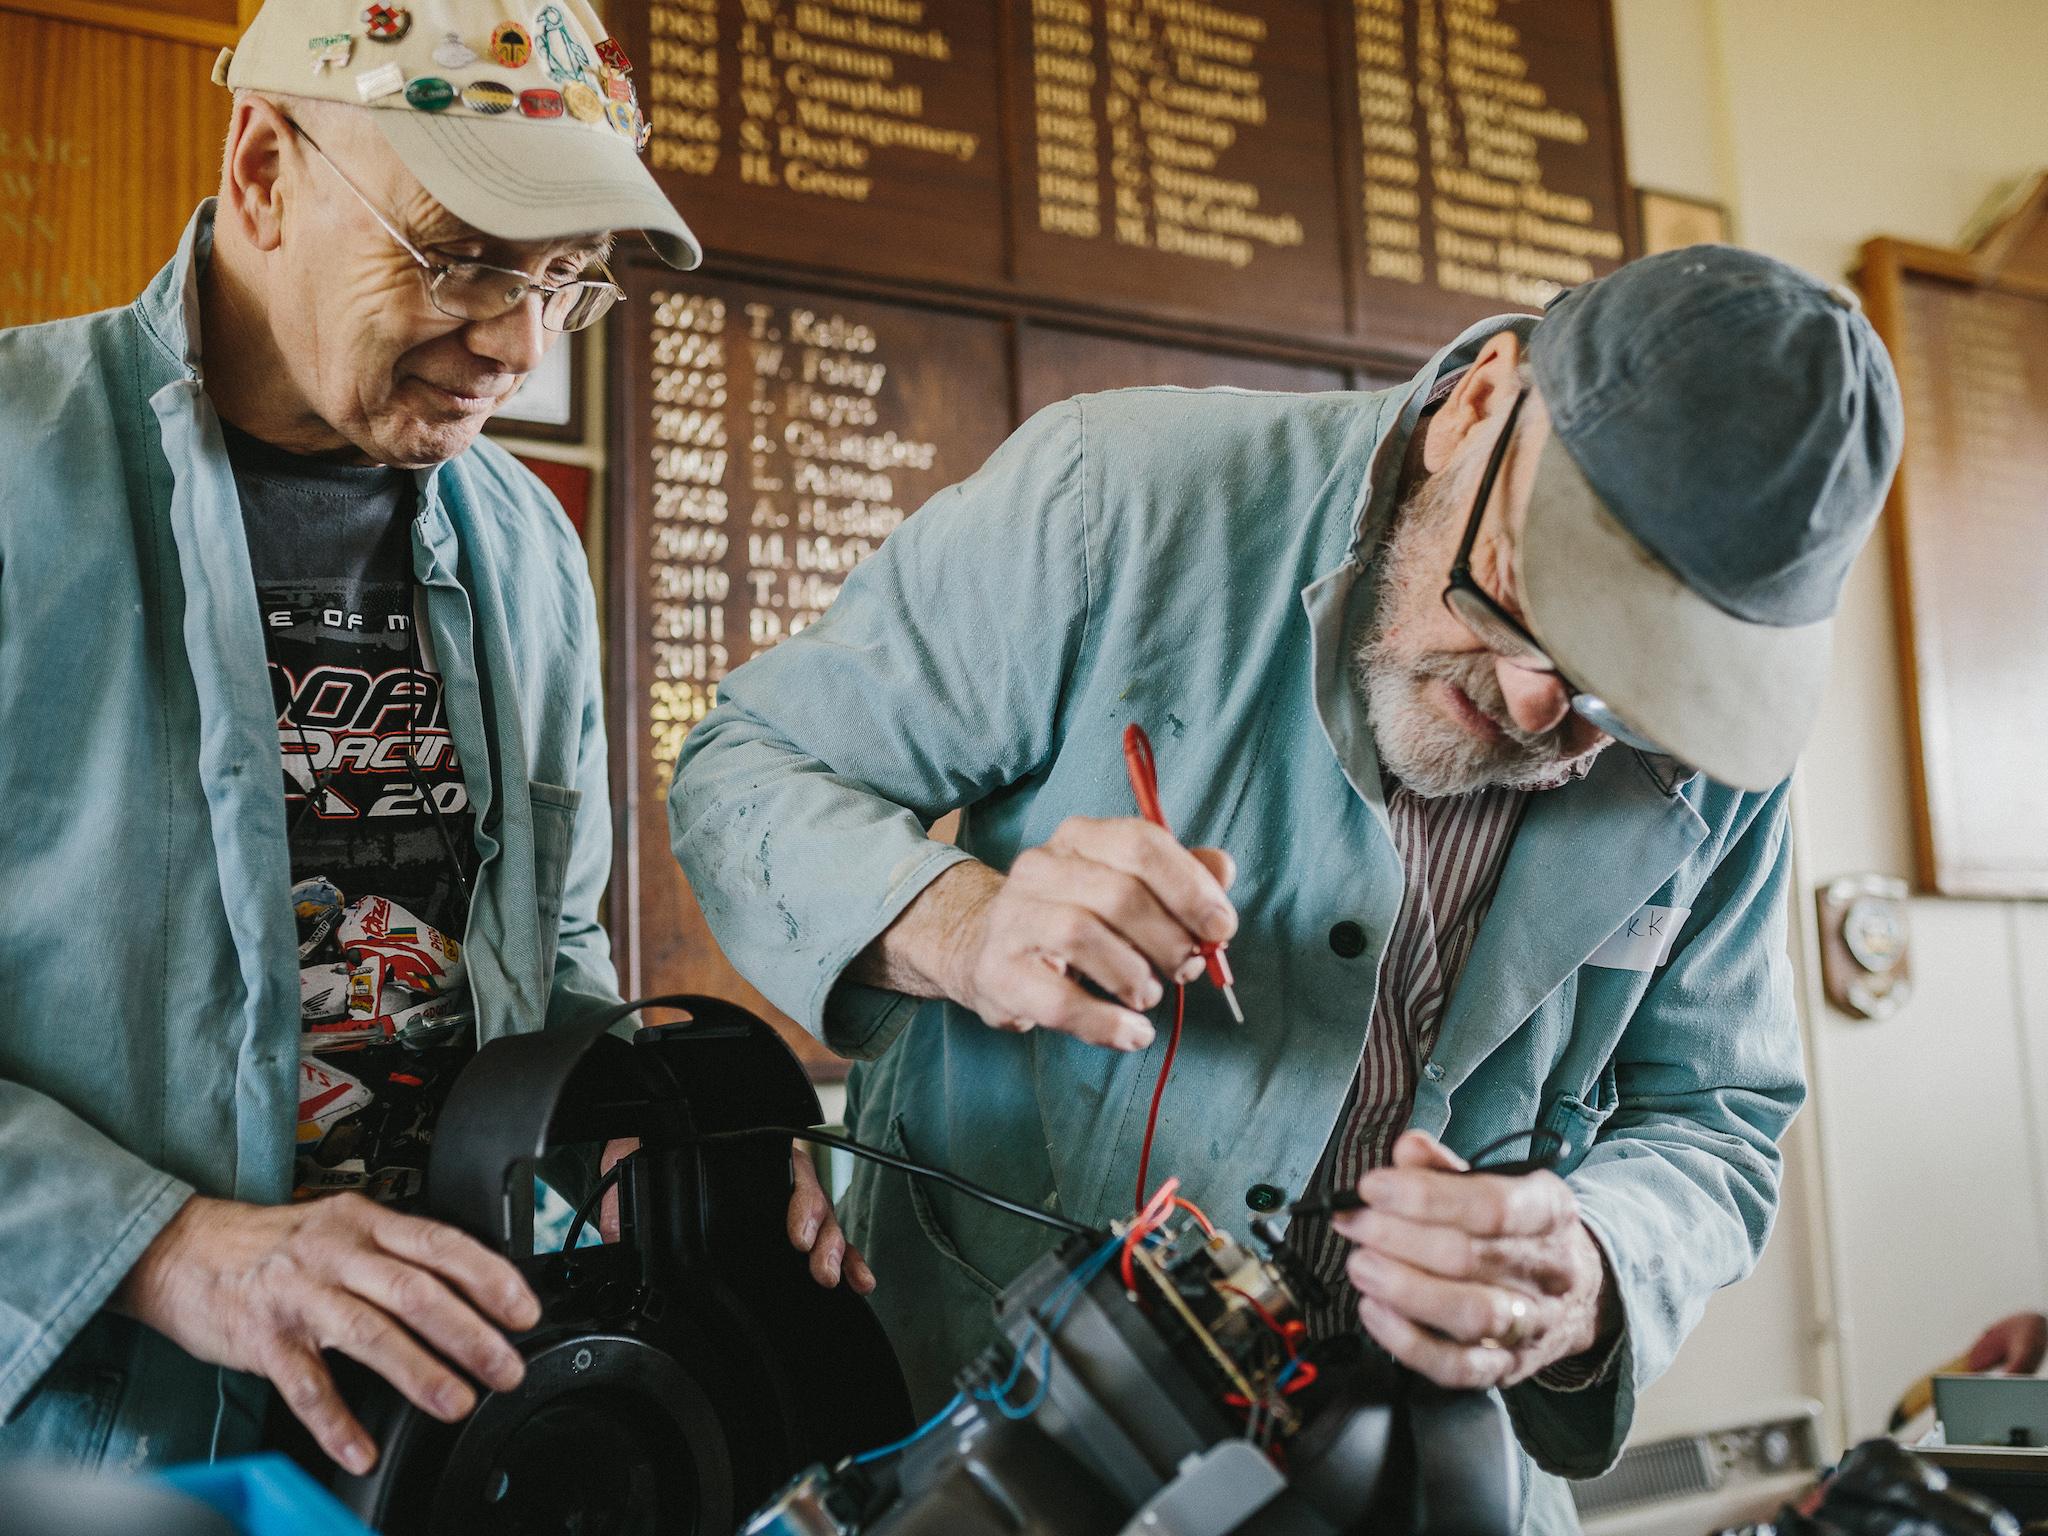 The Belfast Repair Cafe started in 2017 to help people learn how to take care of their belongings